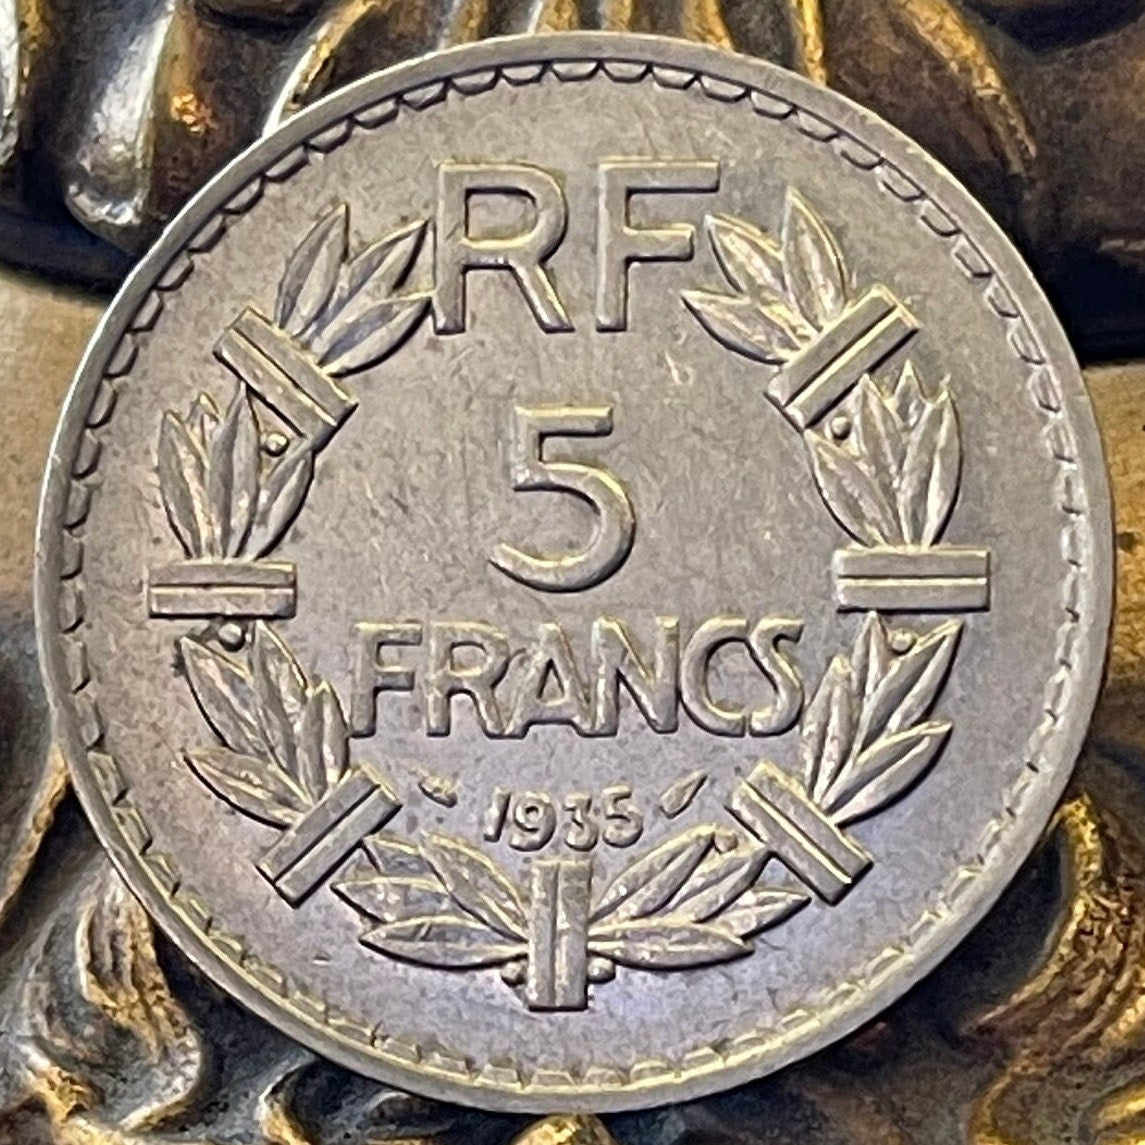 Marianne Laureate 5 Francs France Authentic Coin Money for Jewelry and Craft Making (Third Republic) (Victory Wreath)